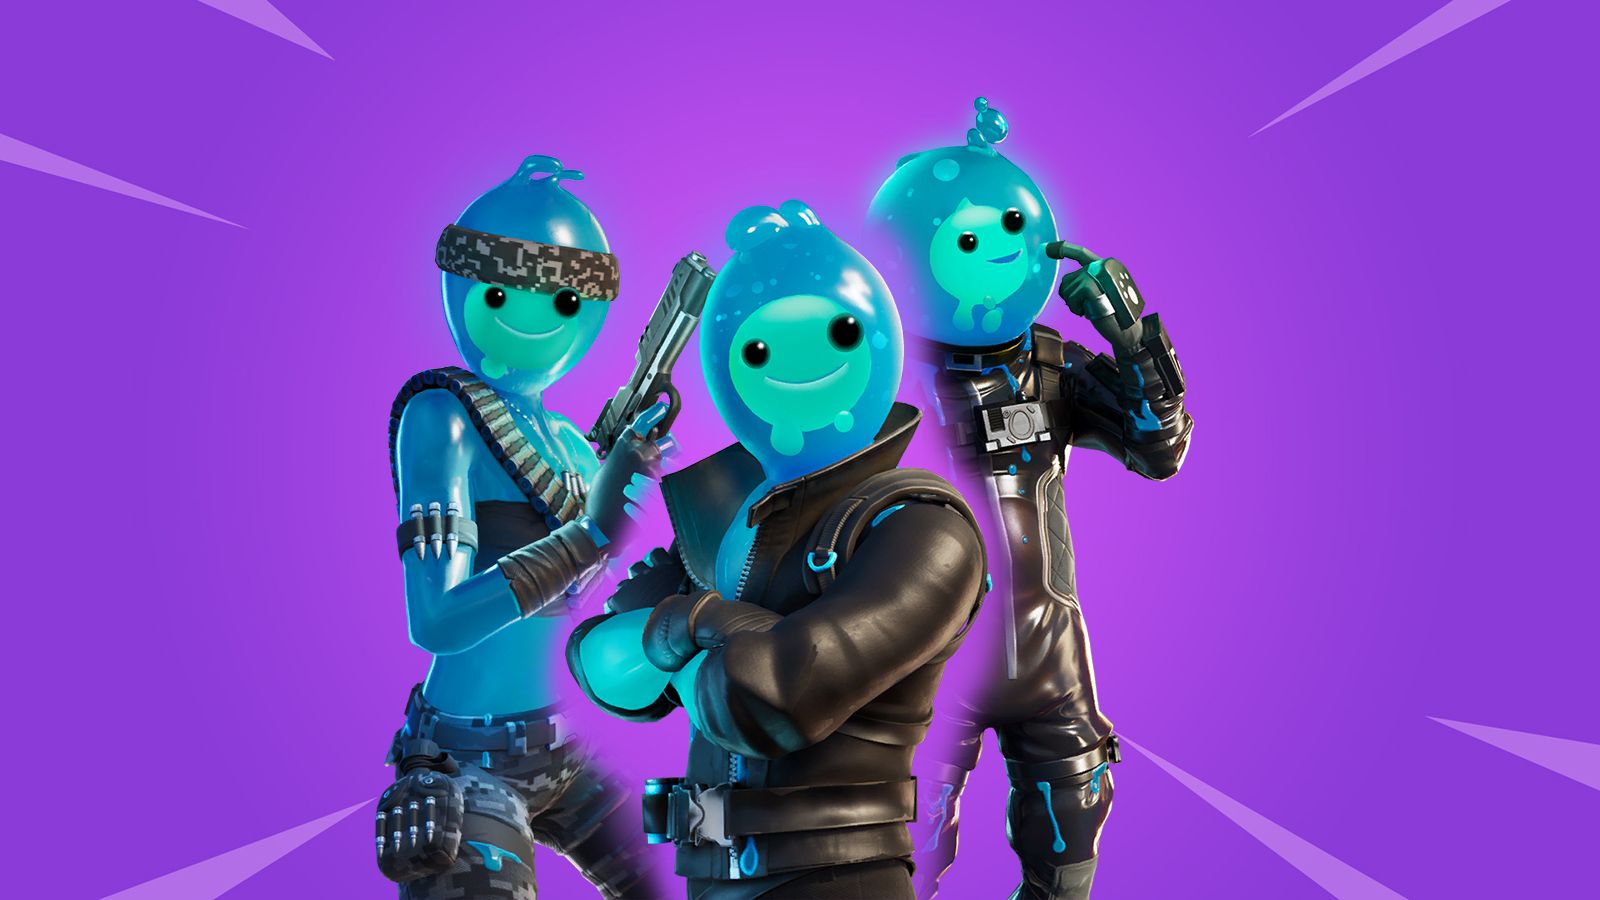 Fortnite Patch v12.20 - All Leaked Cosmetics (Skins, Emotes, Gliders, Wraps)